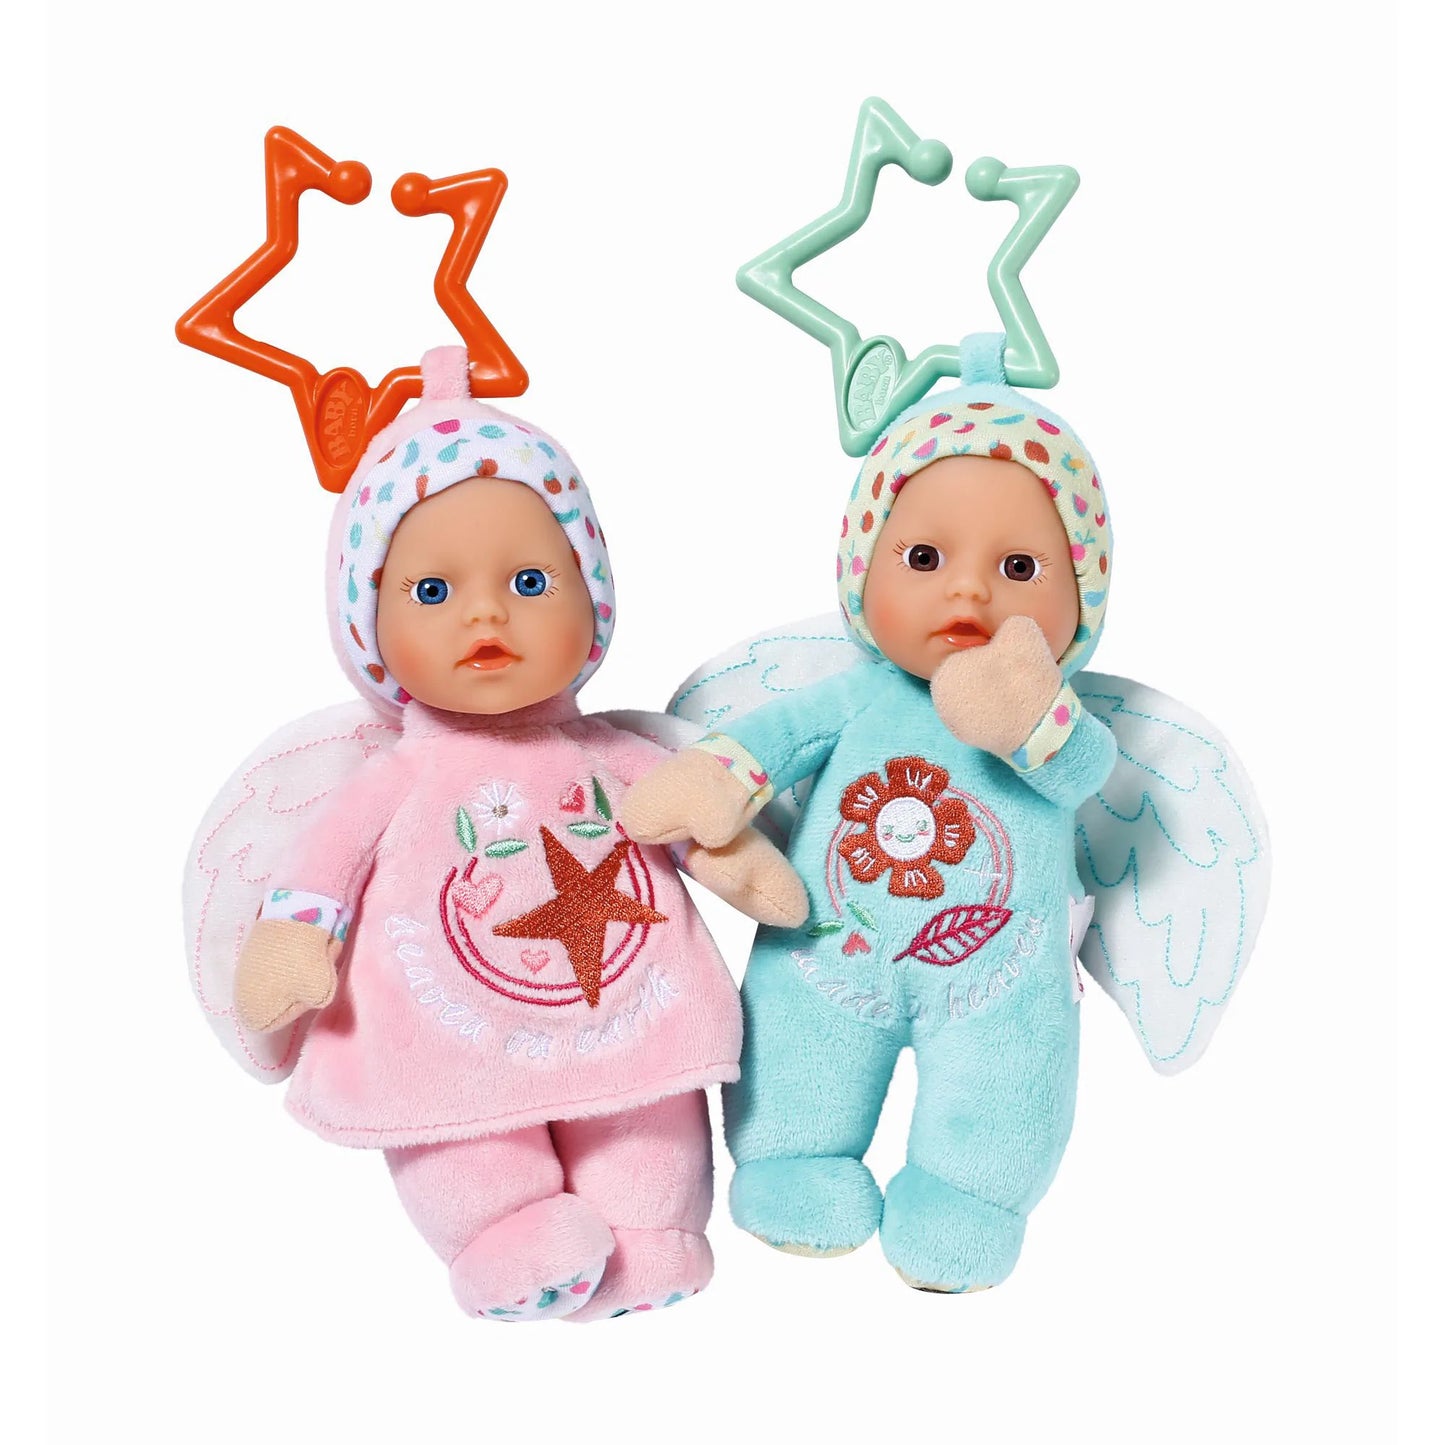 BABY BORN - ANGEL BABY 18 CM WITH PINK OR BLUE CLOTHES - ZAPF CREATION (ZF832295)